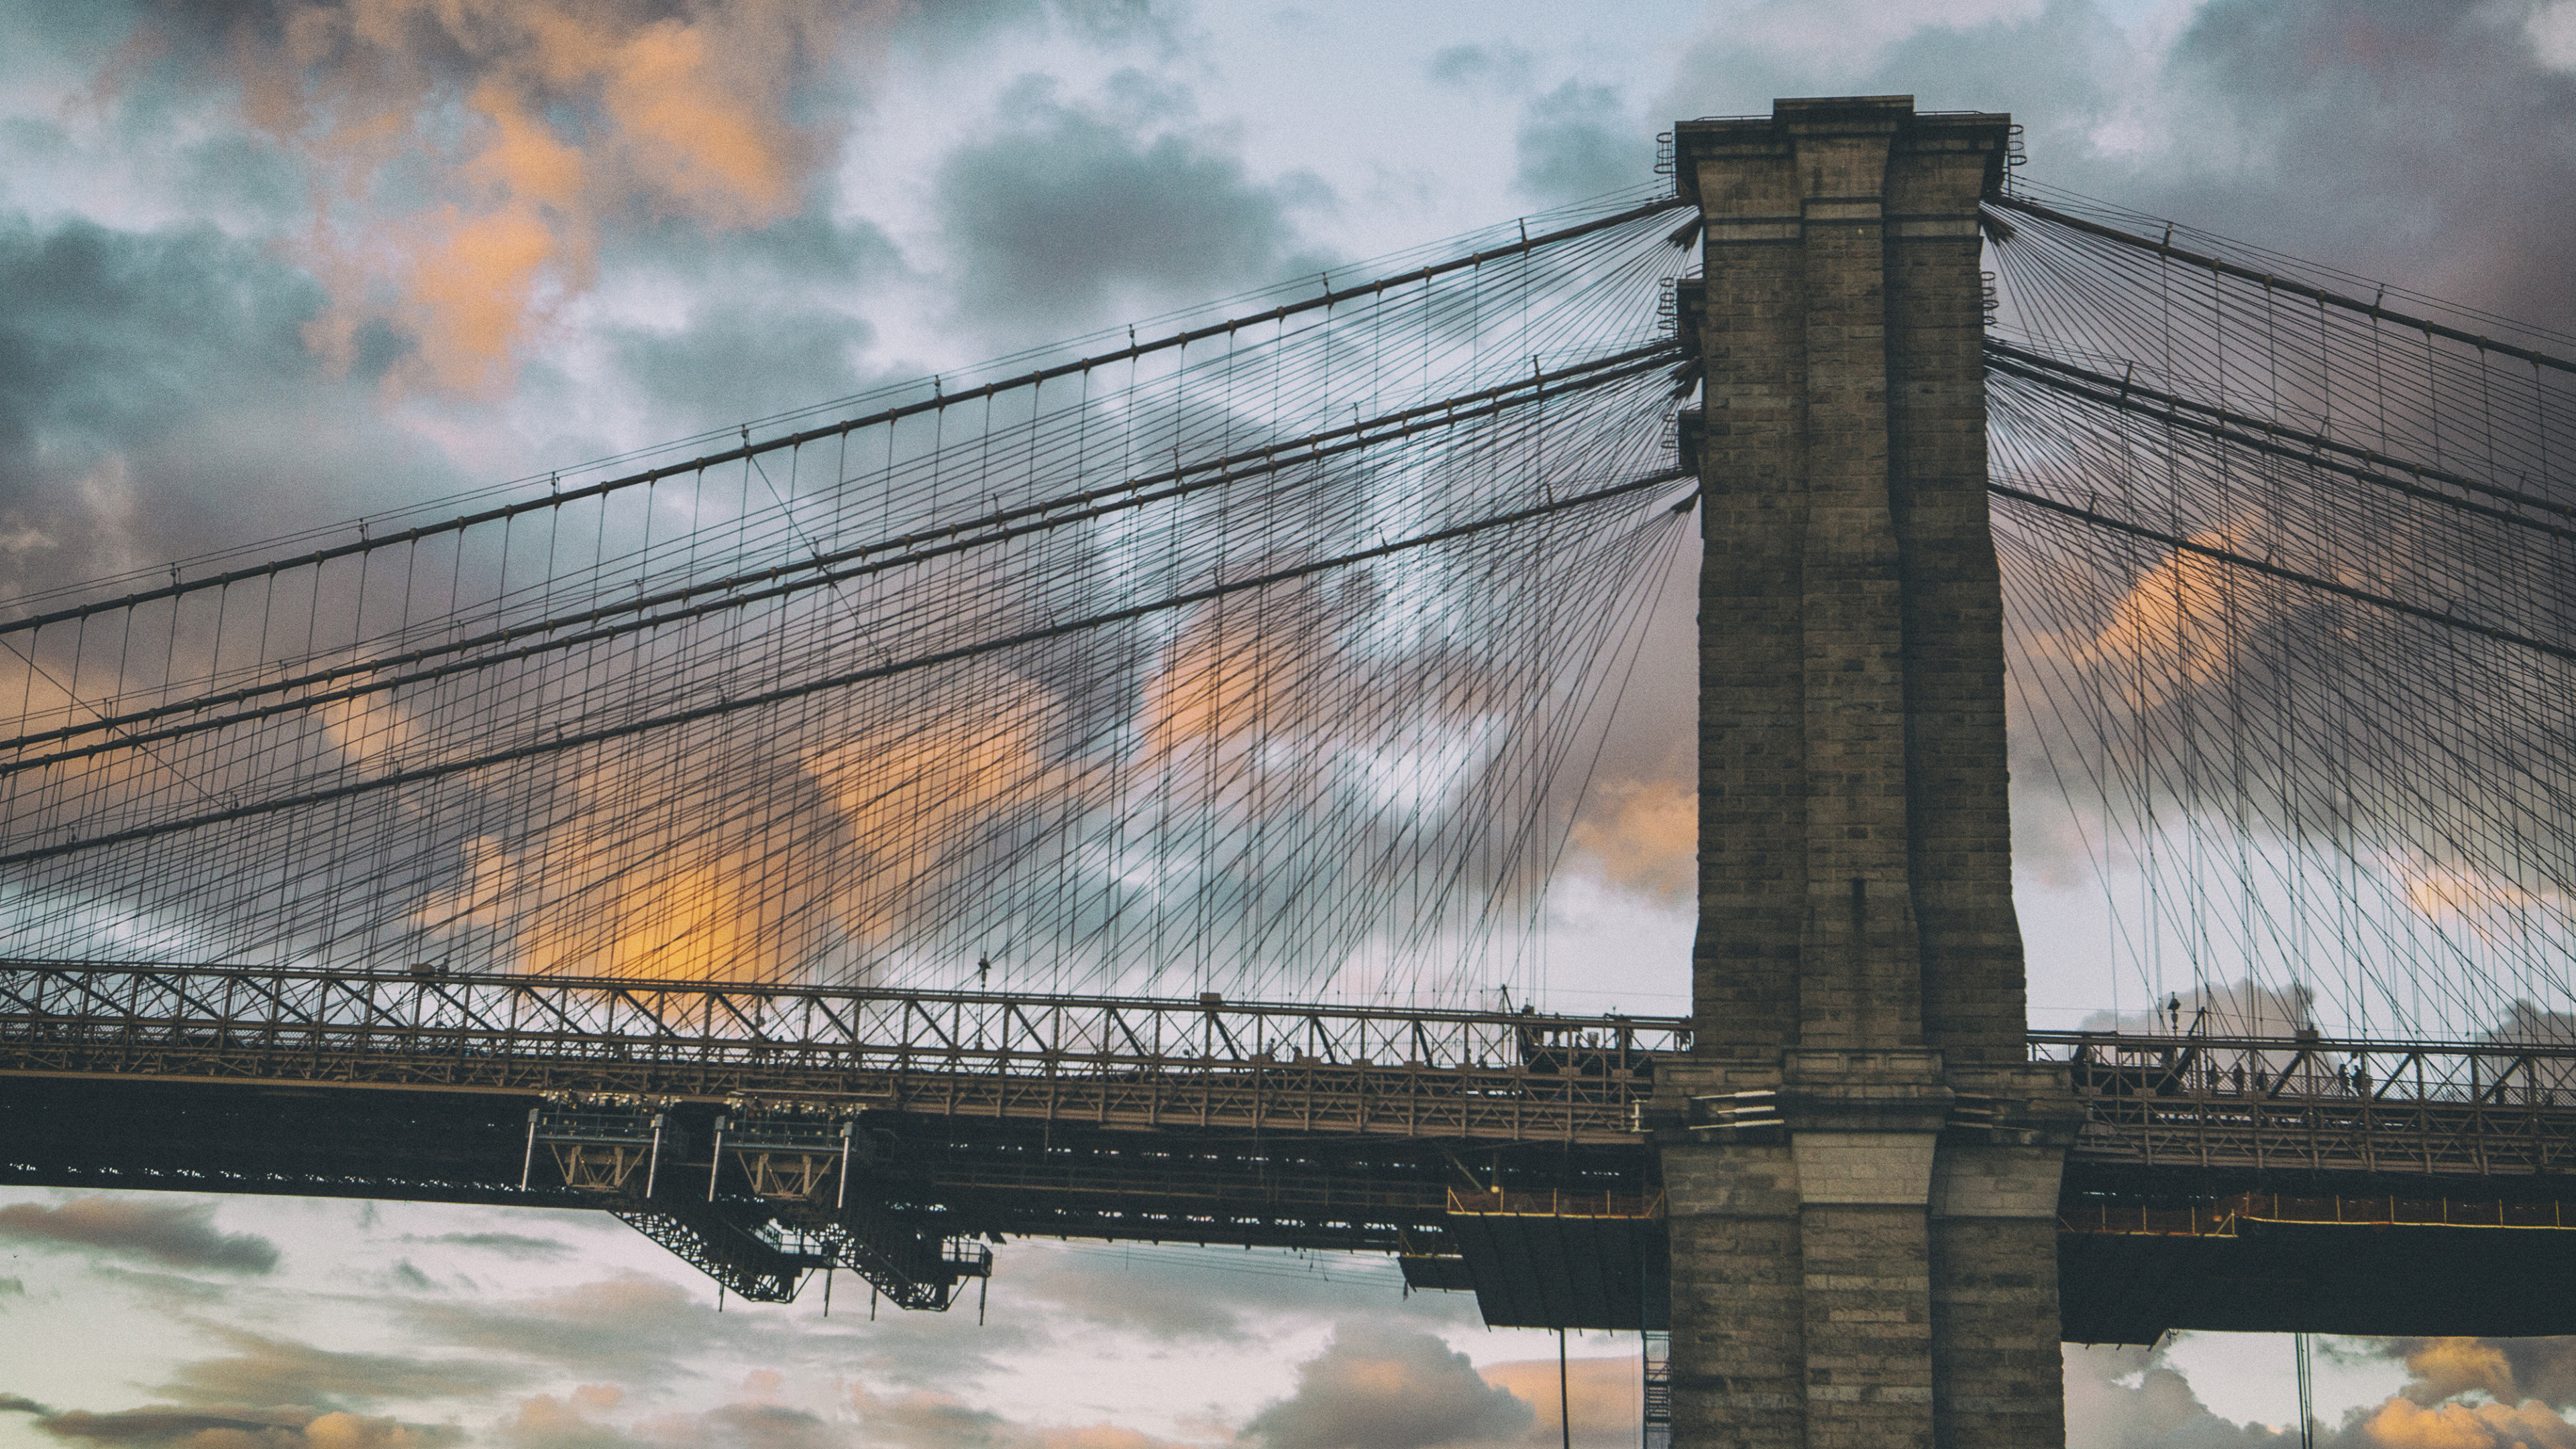 Download The dramatic sunset over the iconic Brooklyn Bridge in New York  City Wallpaper  Wallpaperscom